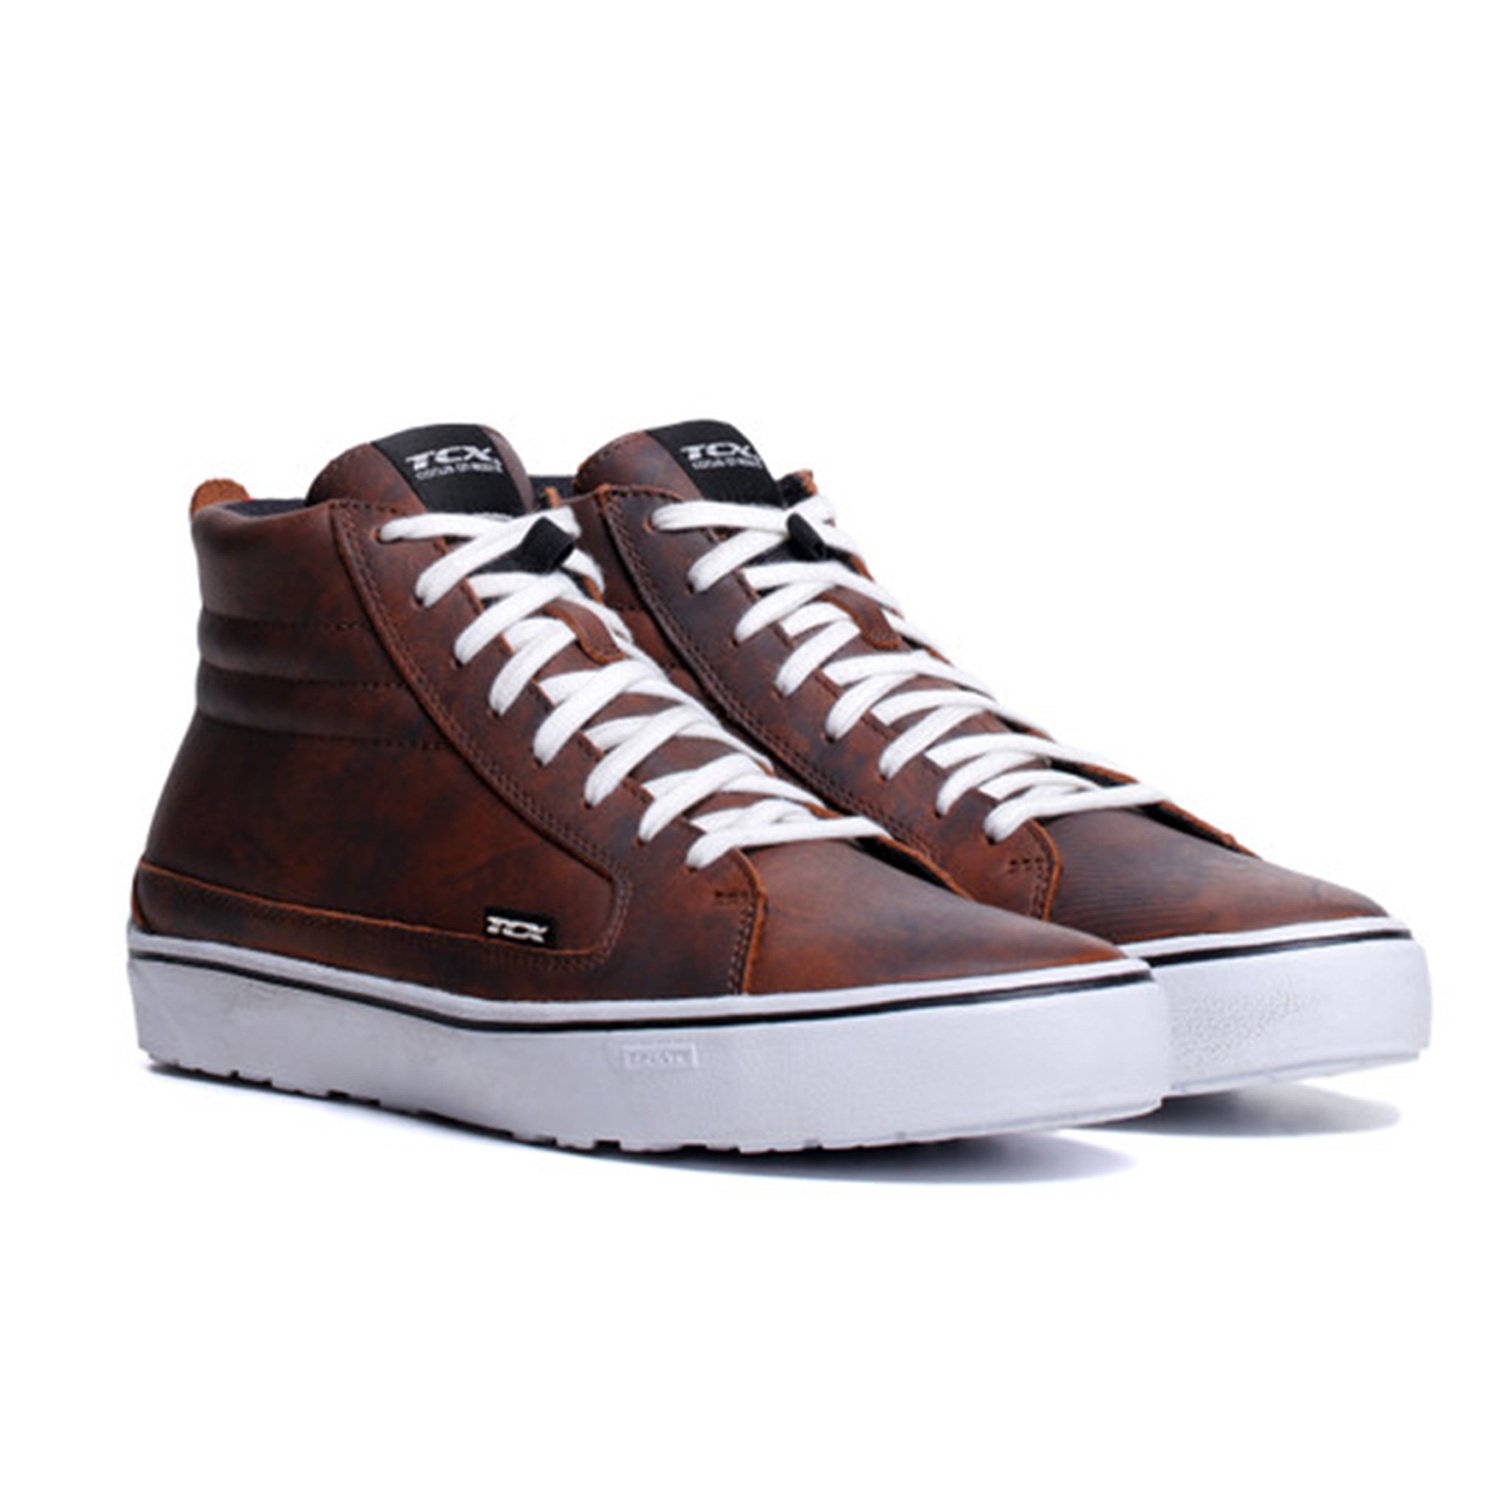 Image of TCX Street 3 WP Marron Blanc Chaussures Taille 46